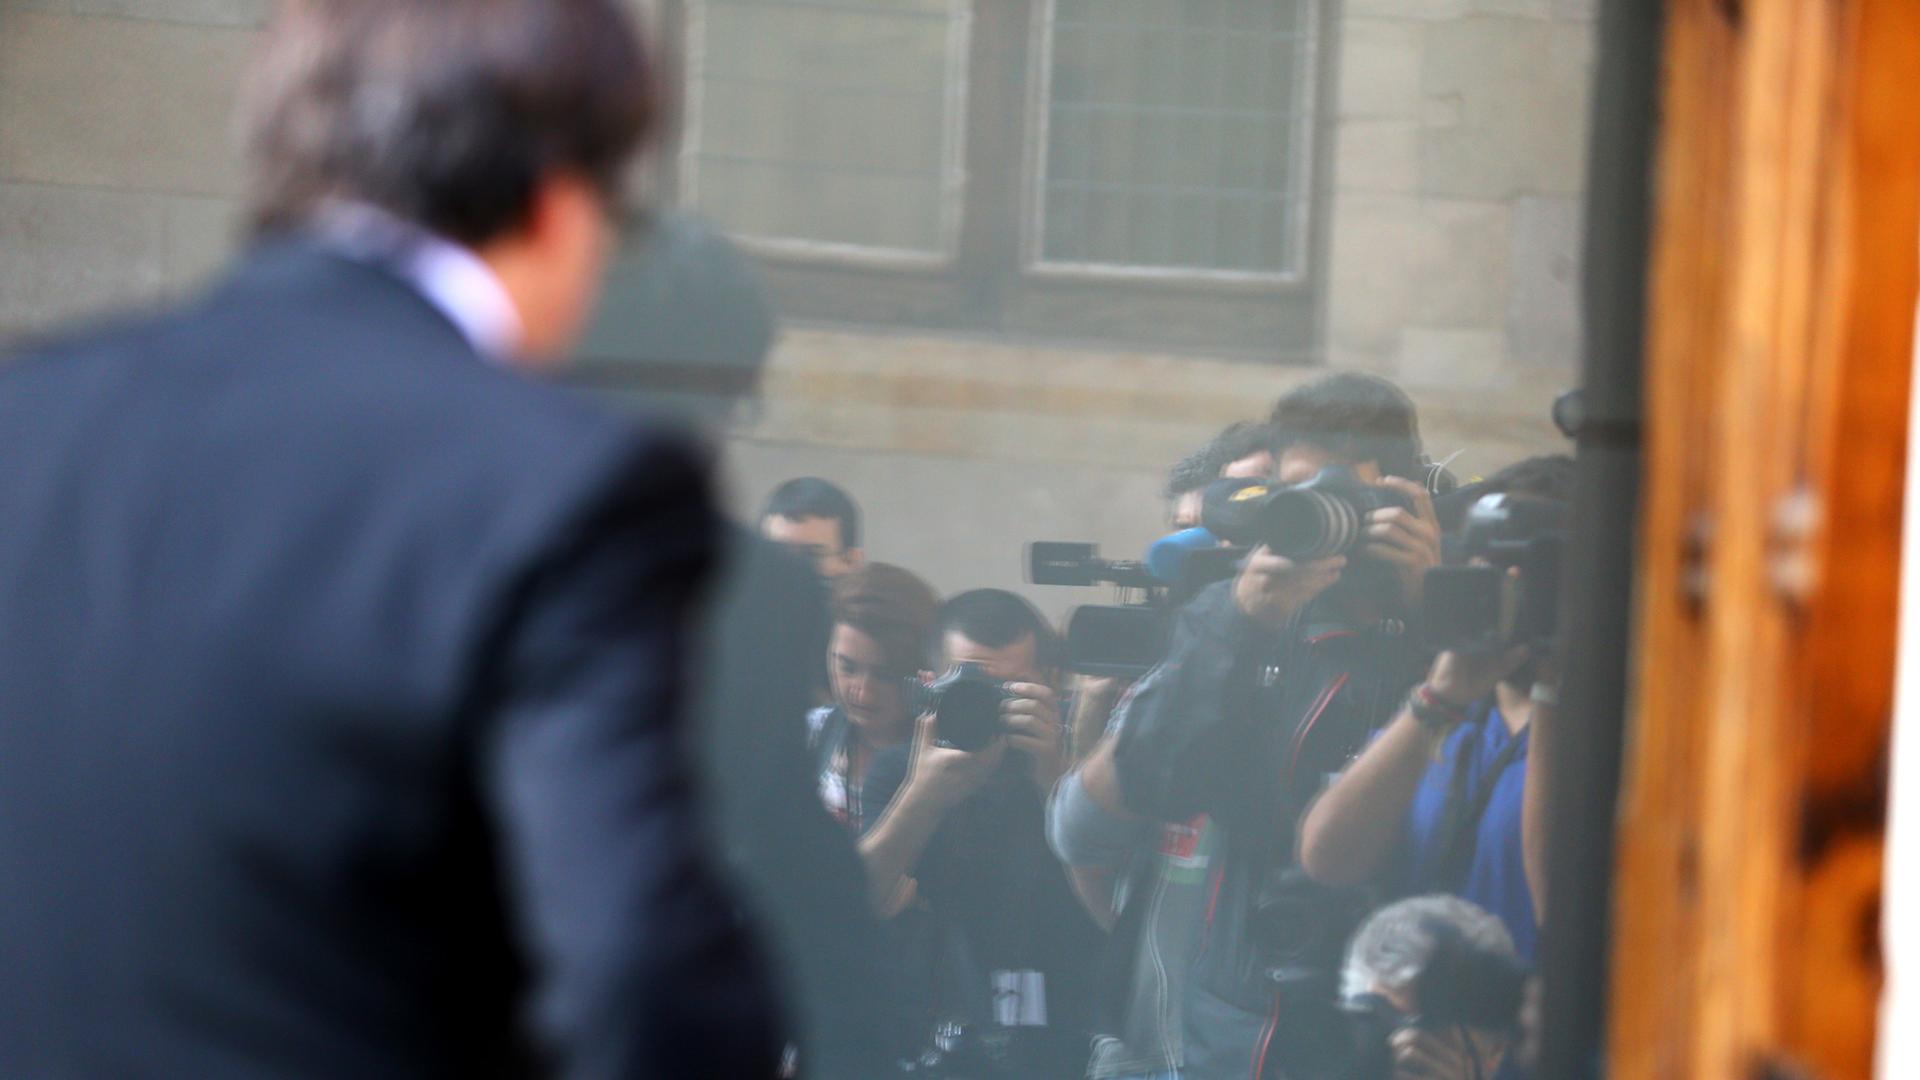 Catalan President Carles Puigdemont arrives for a cabinet meeting at the regional government headquarters in Barcelona, October 10, 2017.